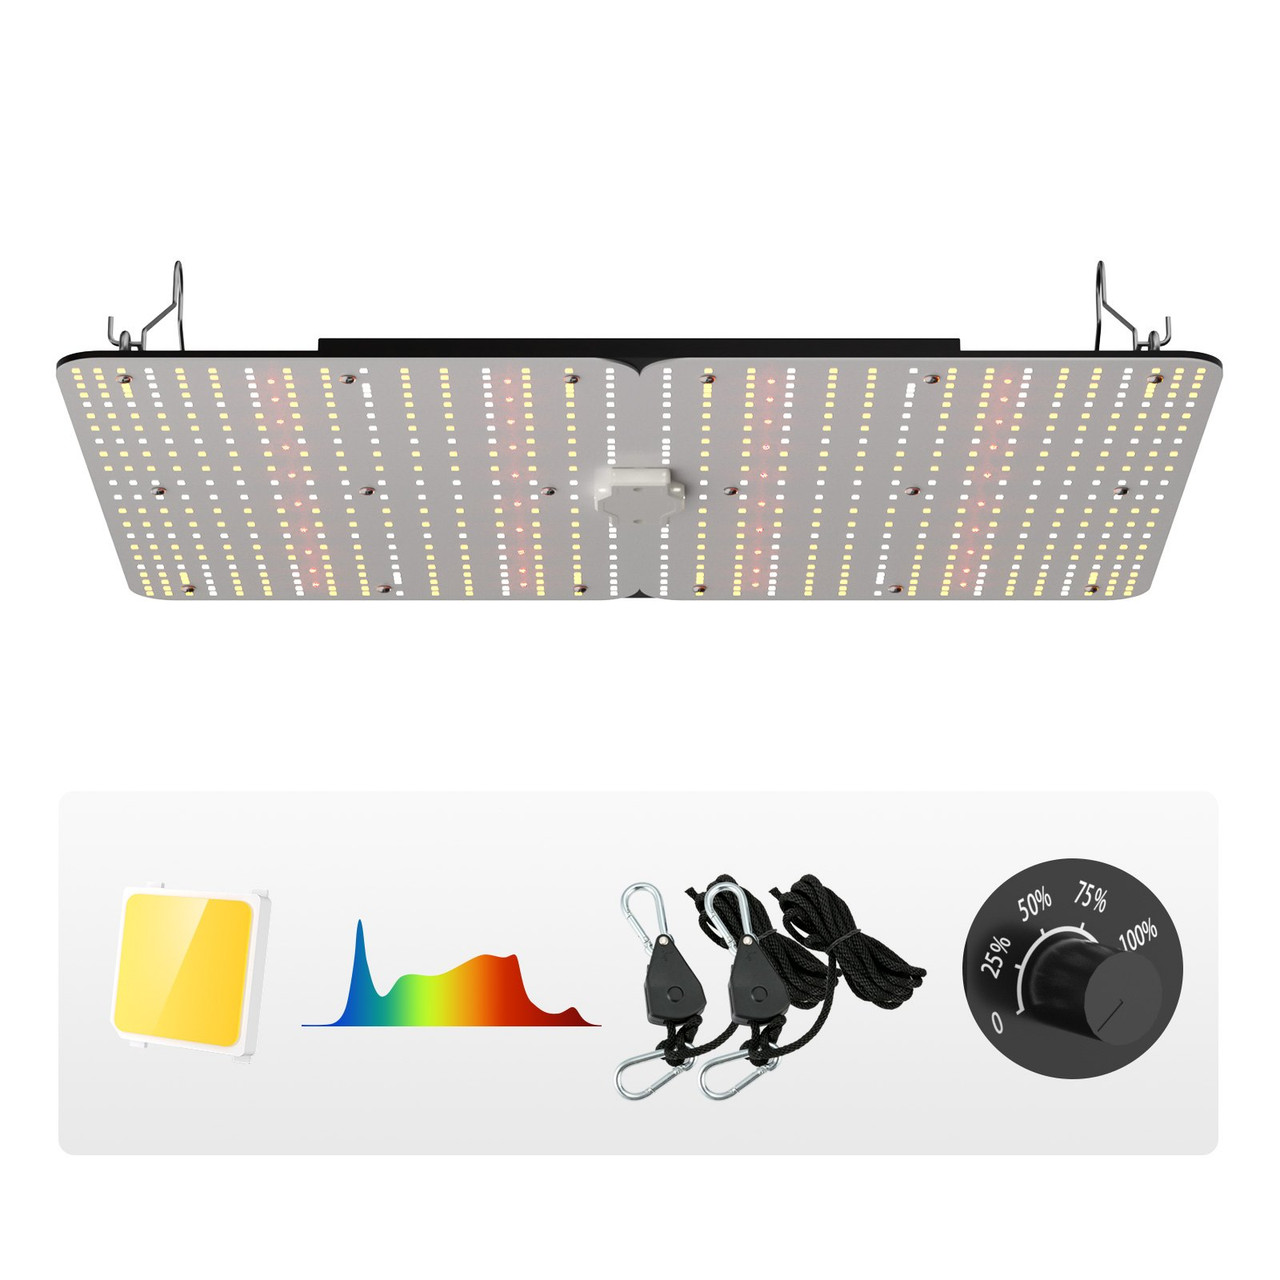 300W LED Grow Light, High Yield Samsung 281B Diodes Growing Lamp for Indoor Plants Seedling Veg and Bloom Greenhouse Growing, Full Spectrum Dimmable, Daisy Chain Driver for 3x3/4x4 ft Grow Tent